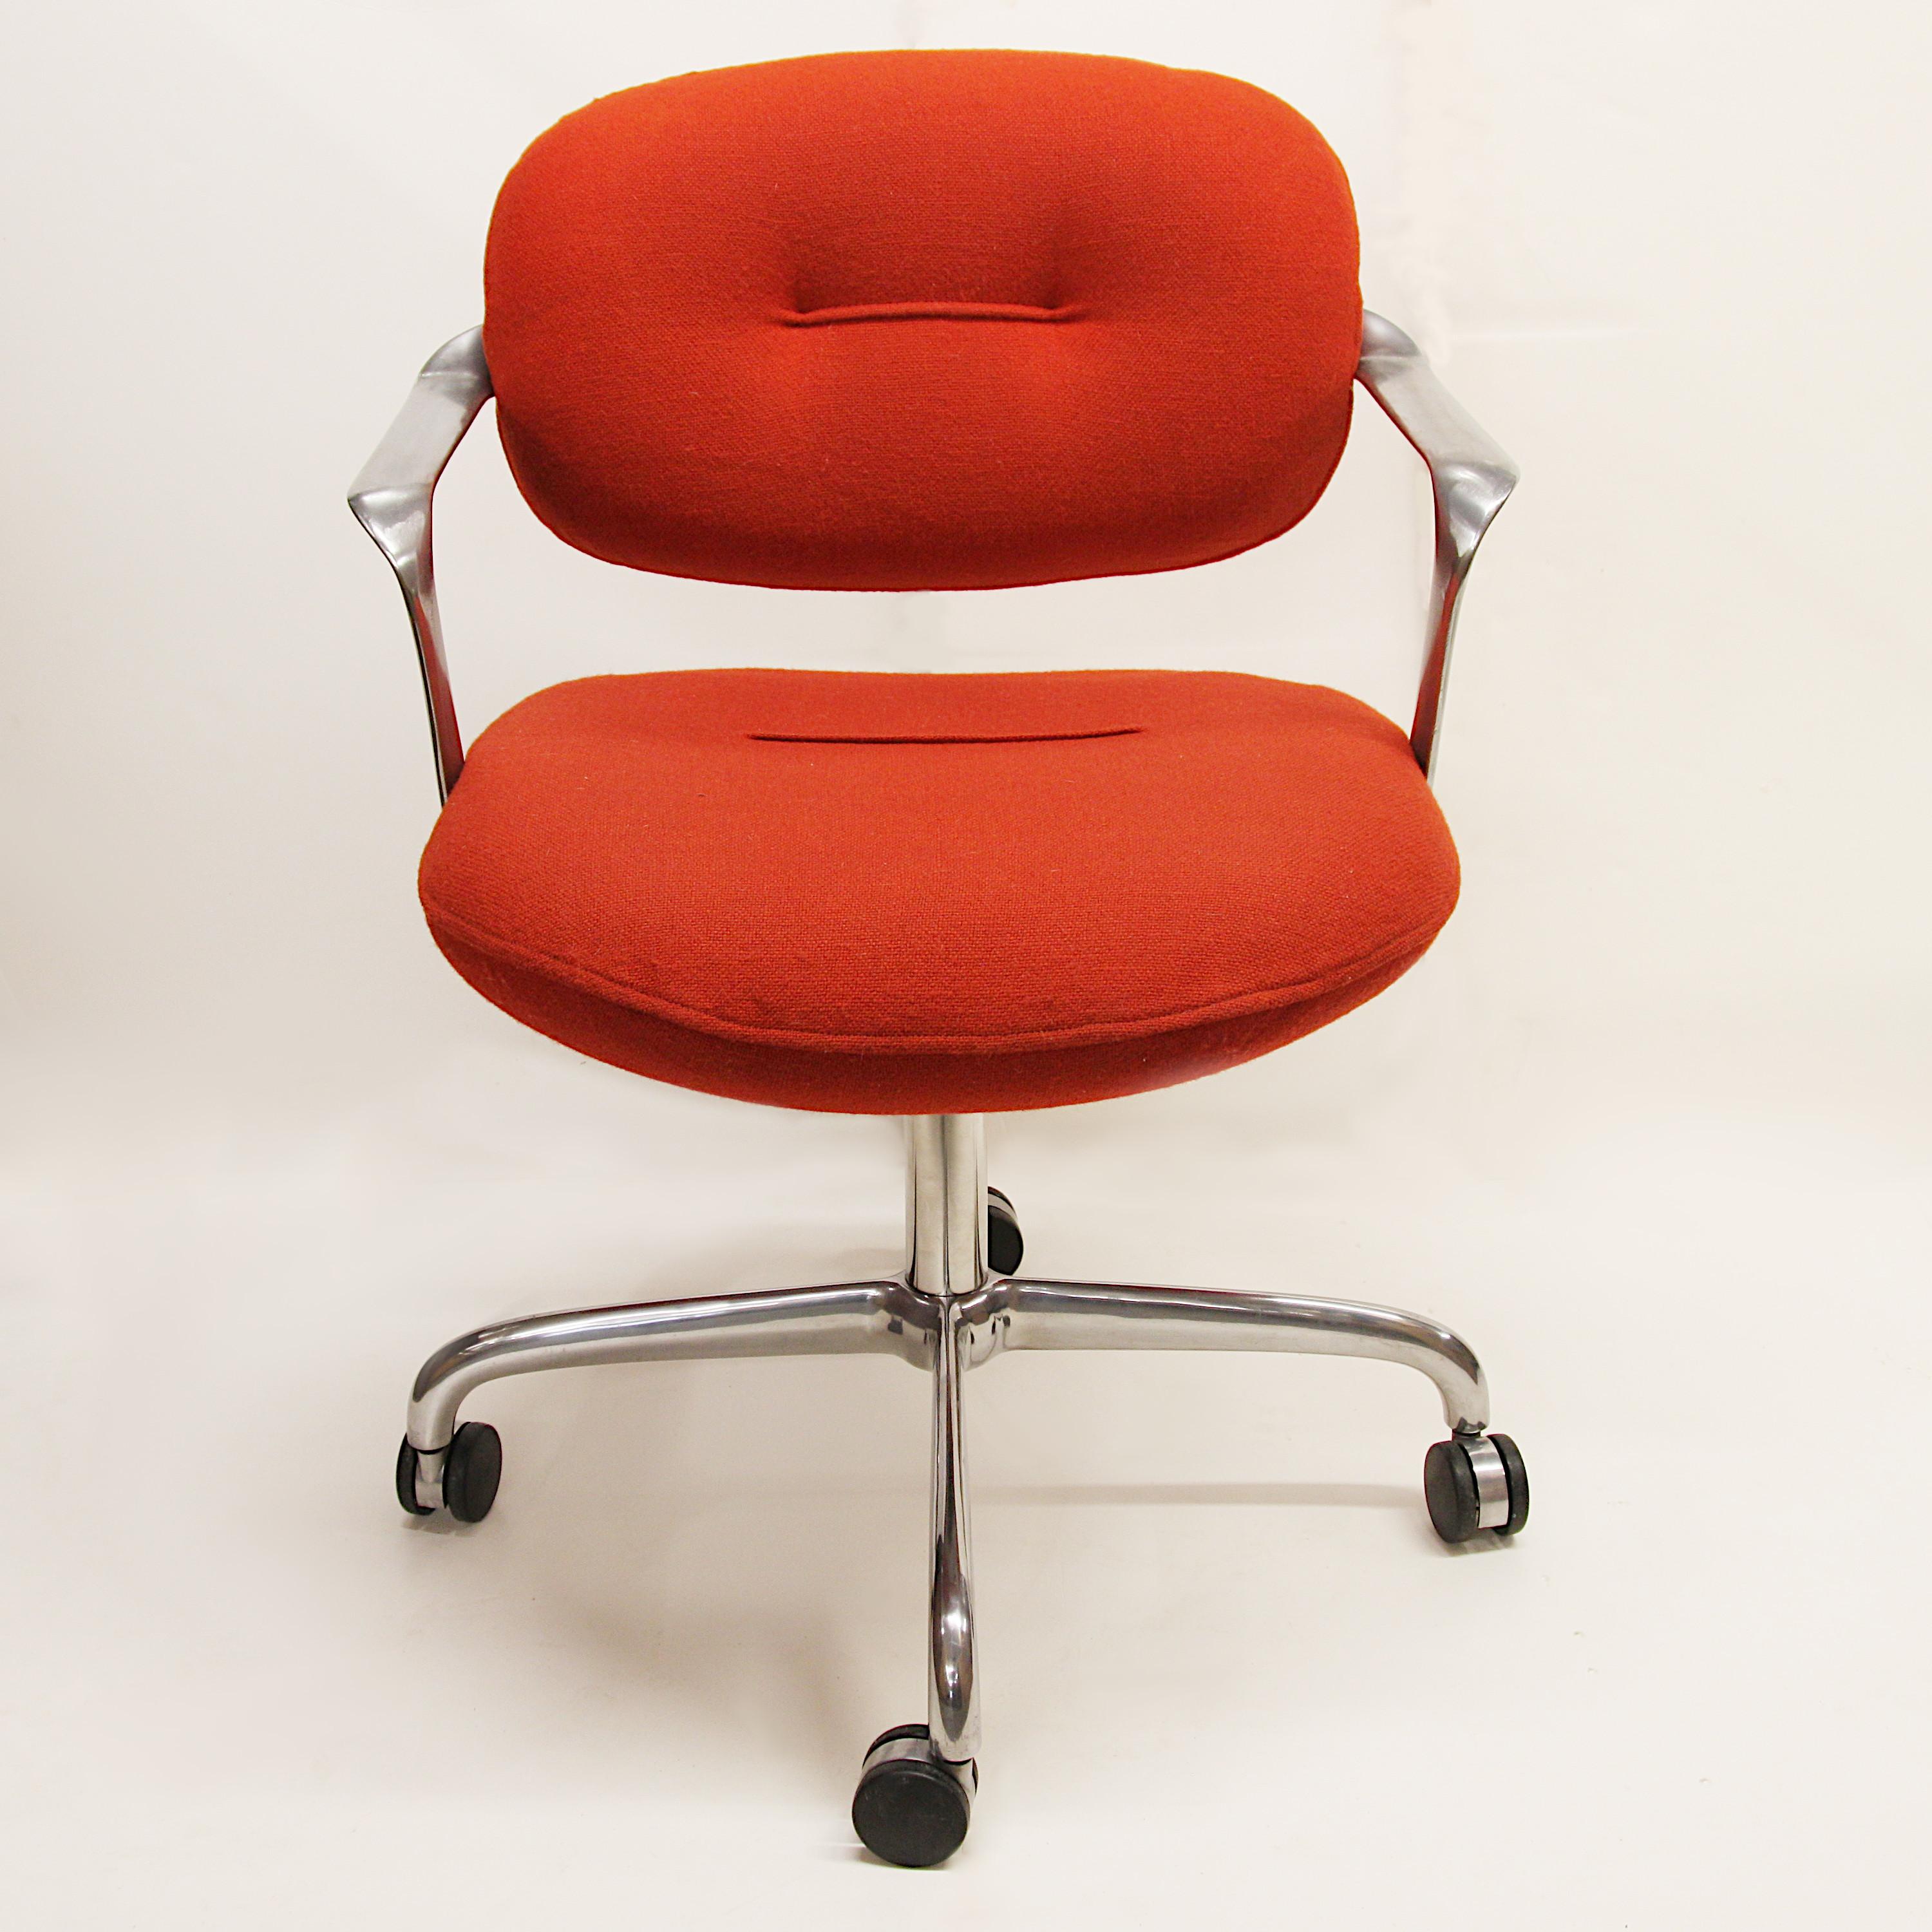 Late 20th Century Mid-Century Modern Swivel Desk Chair by Andrew Morrison & Bruce Hannah for Knoll